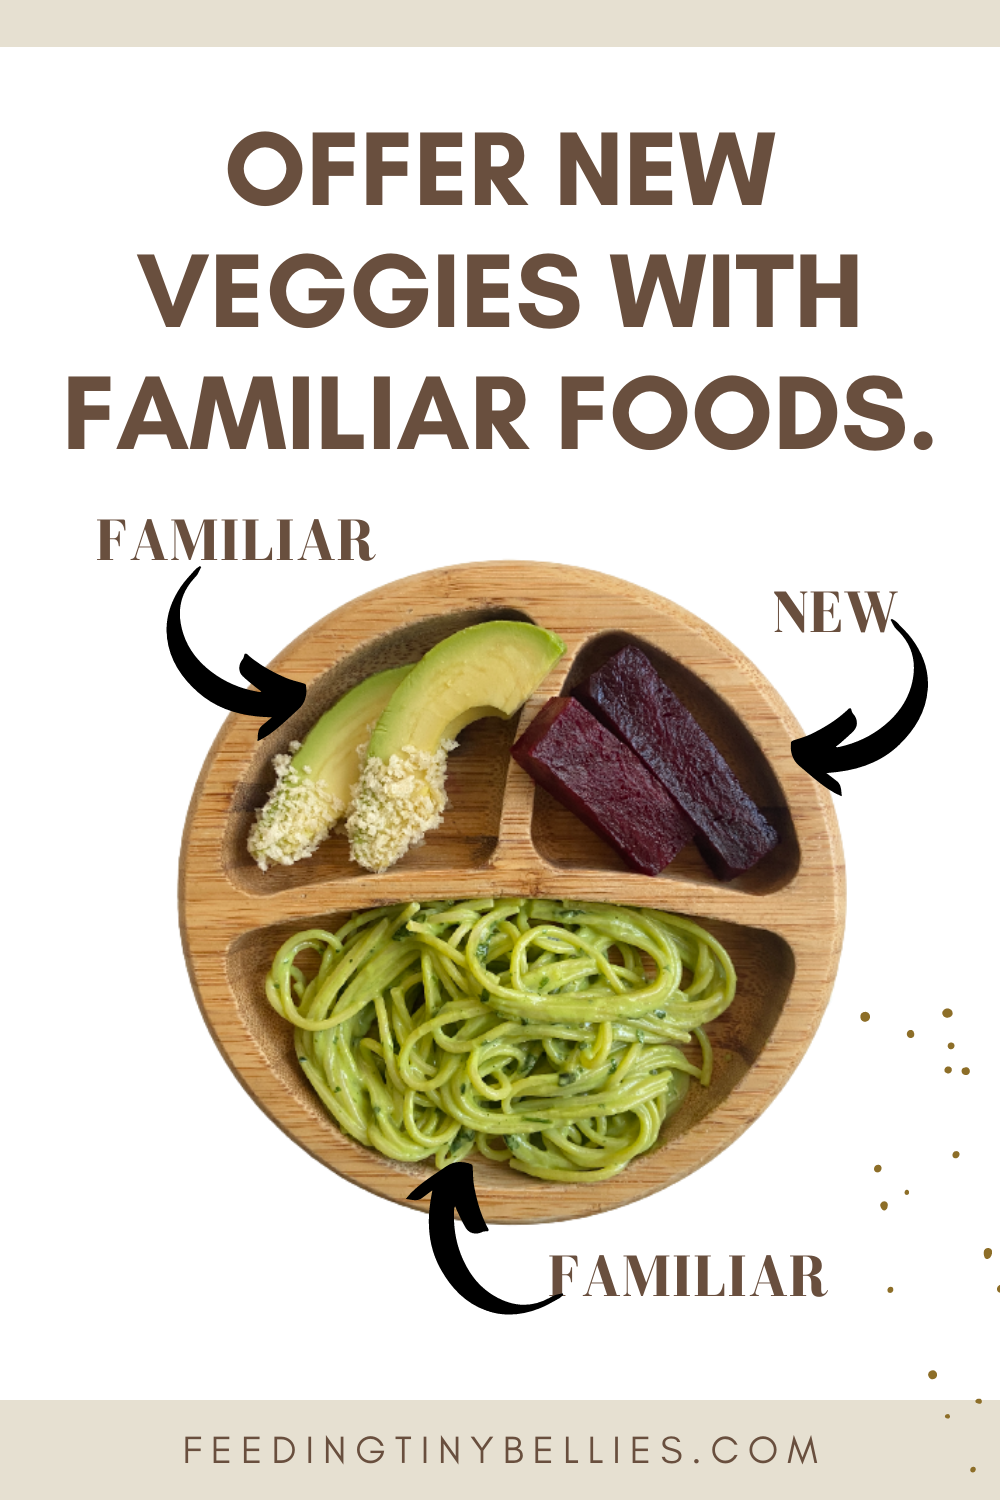 Offer new veggies with familiar foods.